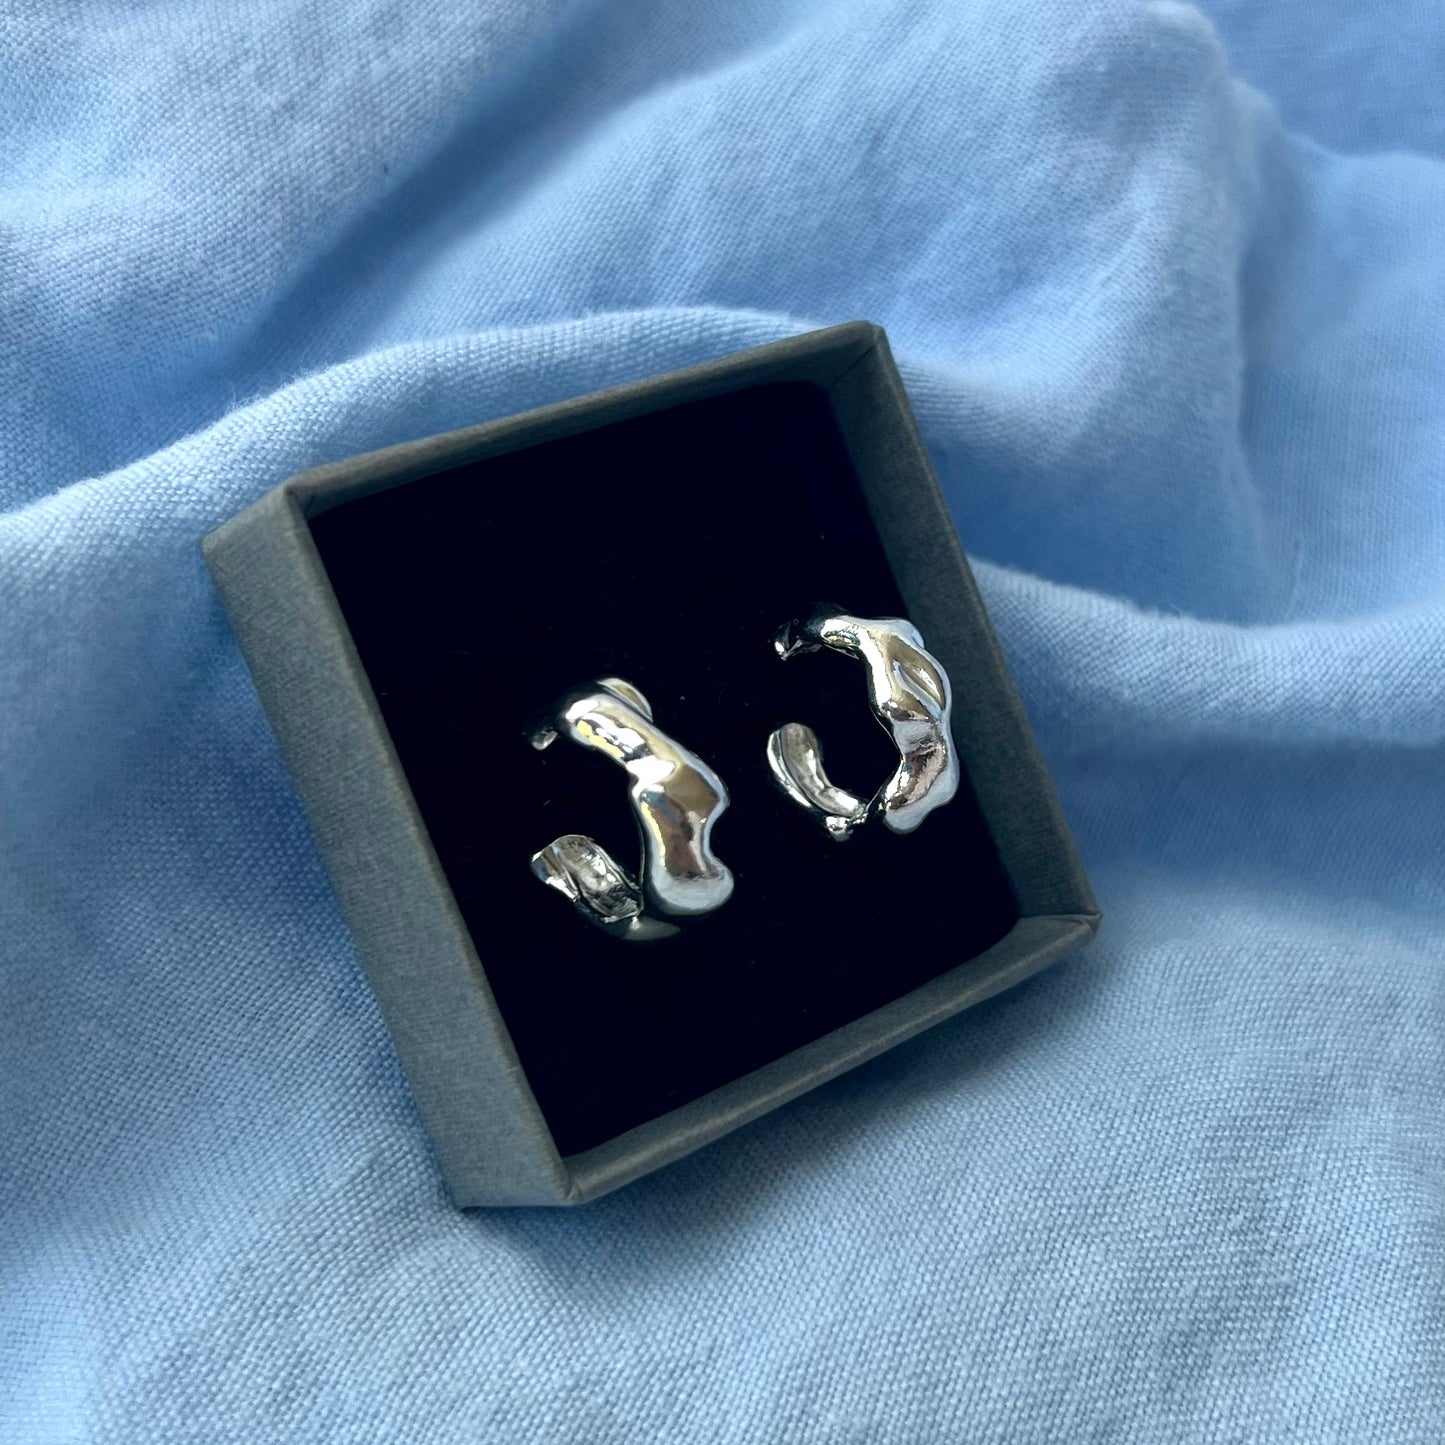 Small wavy silver earrings in a grey box on a blue background.